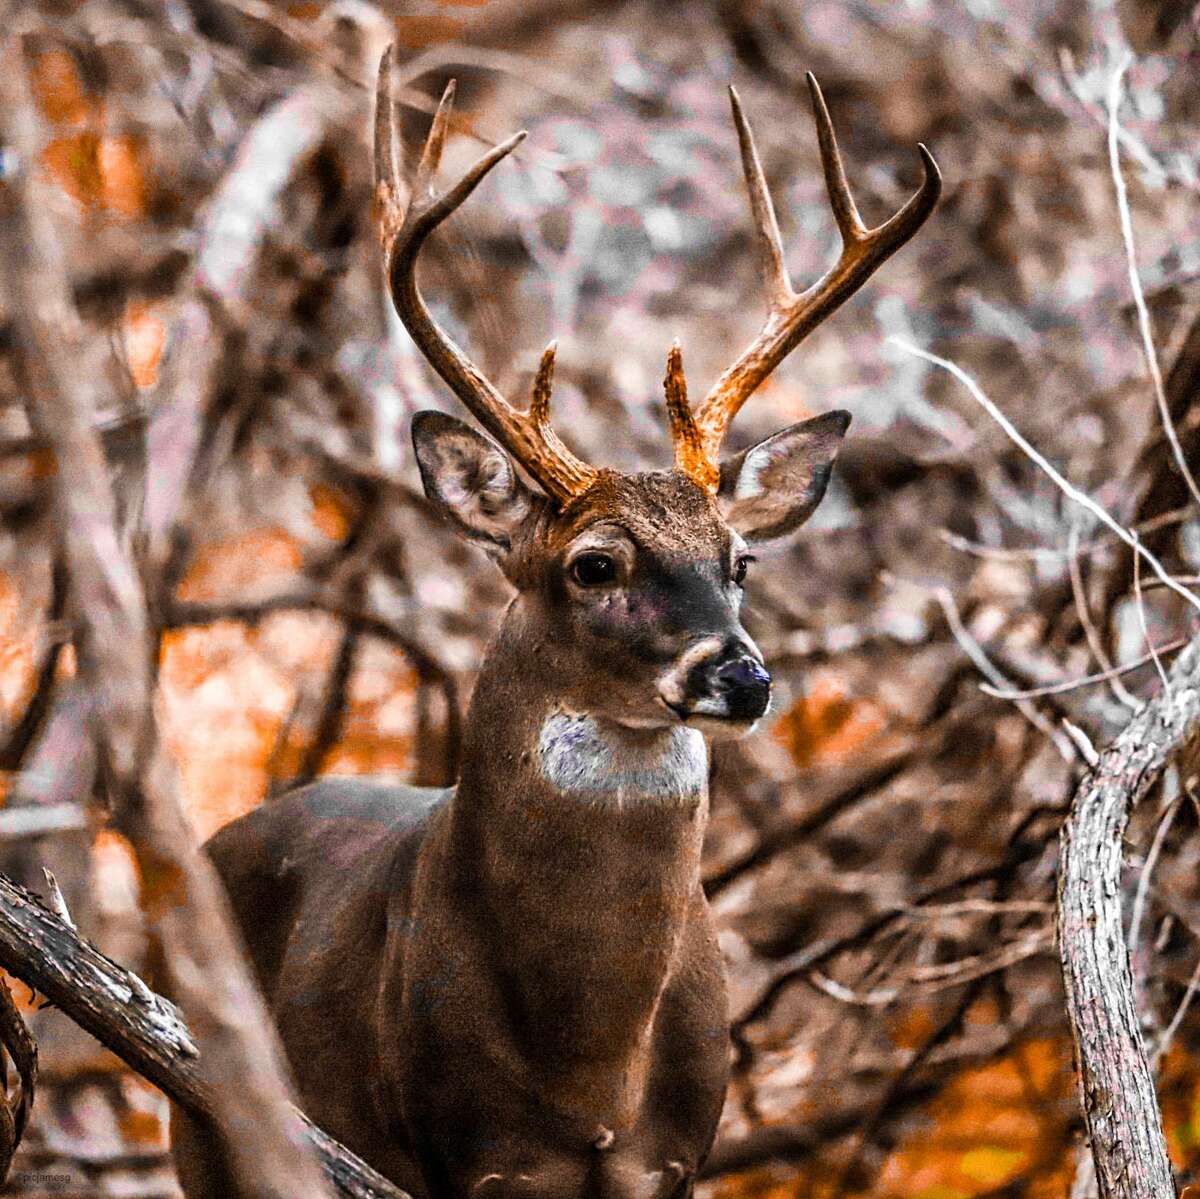 A white-tailed deer photographed by James Goyet in San Antonio. The former Air Force survival specialist uses his military skills to “hunt” deer just for photos.